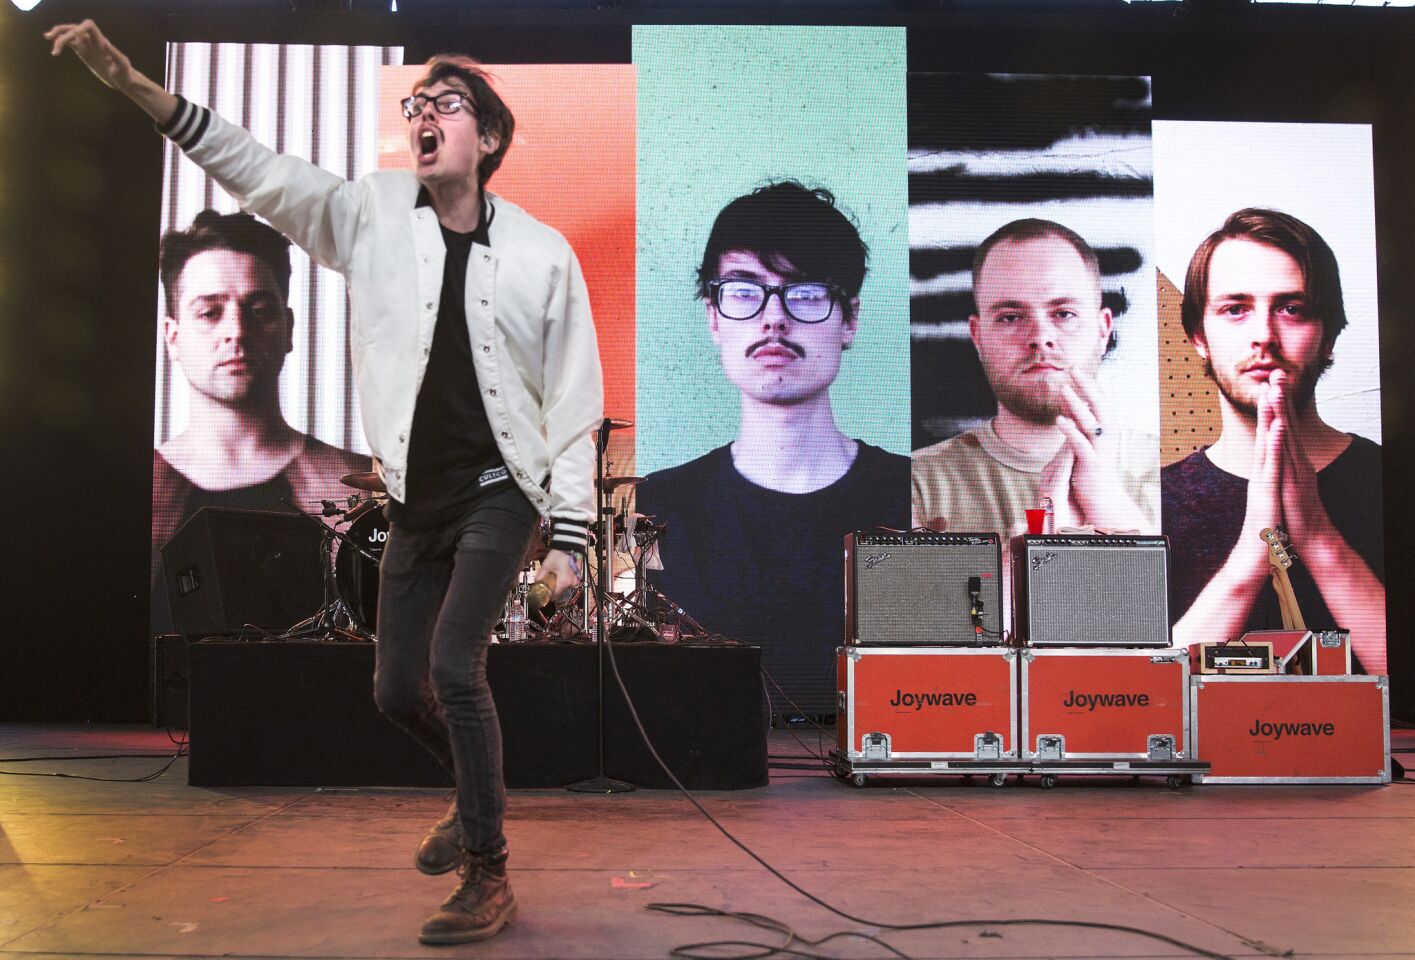 Joywave lead singer Daniel Armbruster performs in the Mojave tent at Coachella.